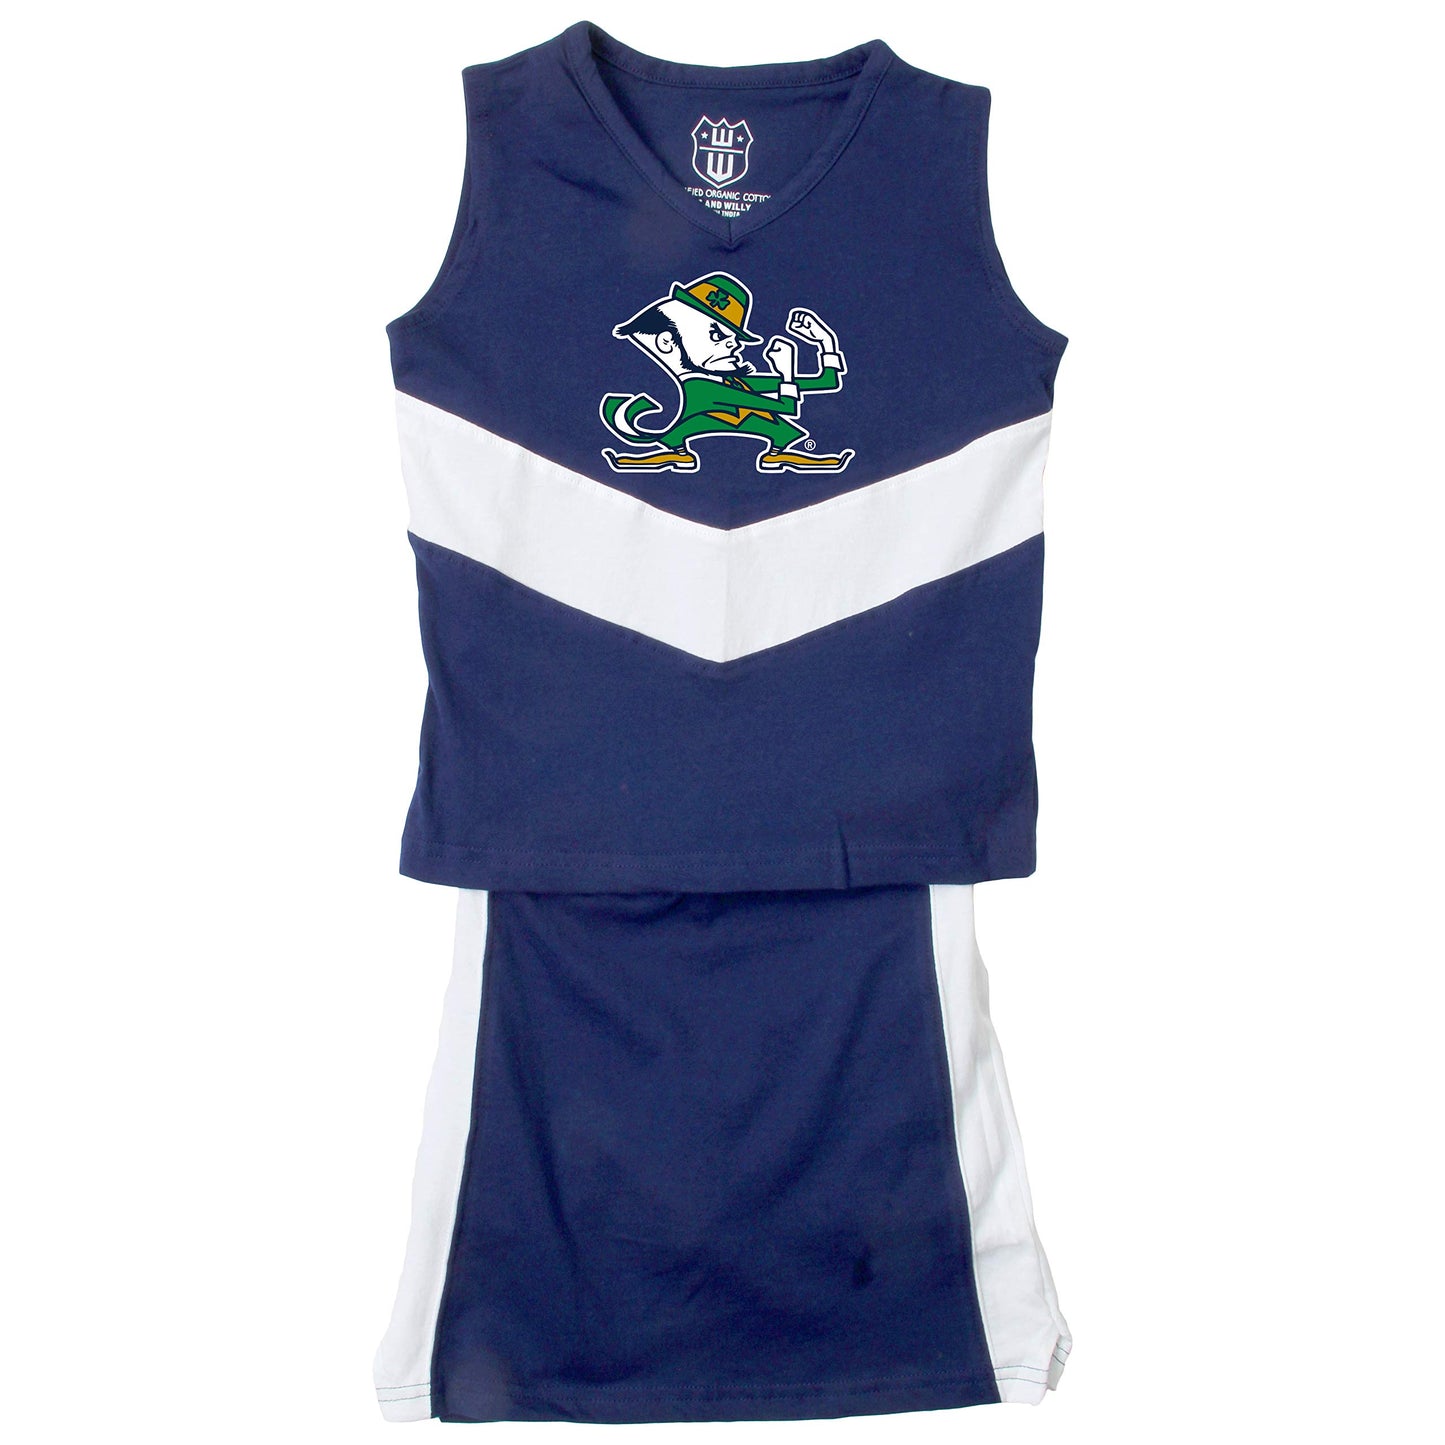 Notre Dame Fighting Irish Wes and Willy Girls and Toddlers Cheer Set